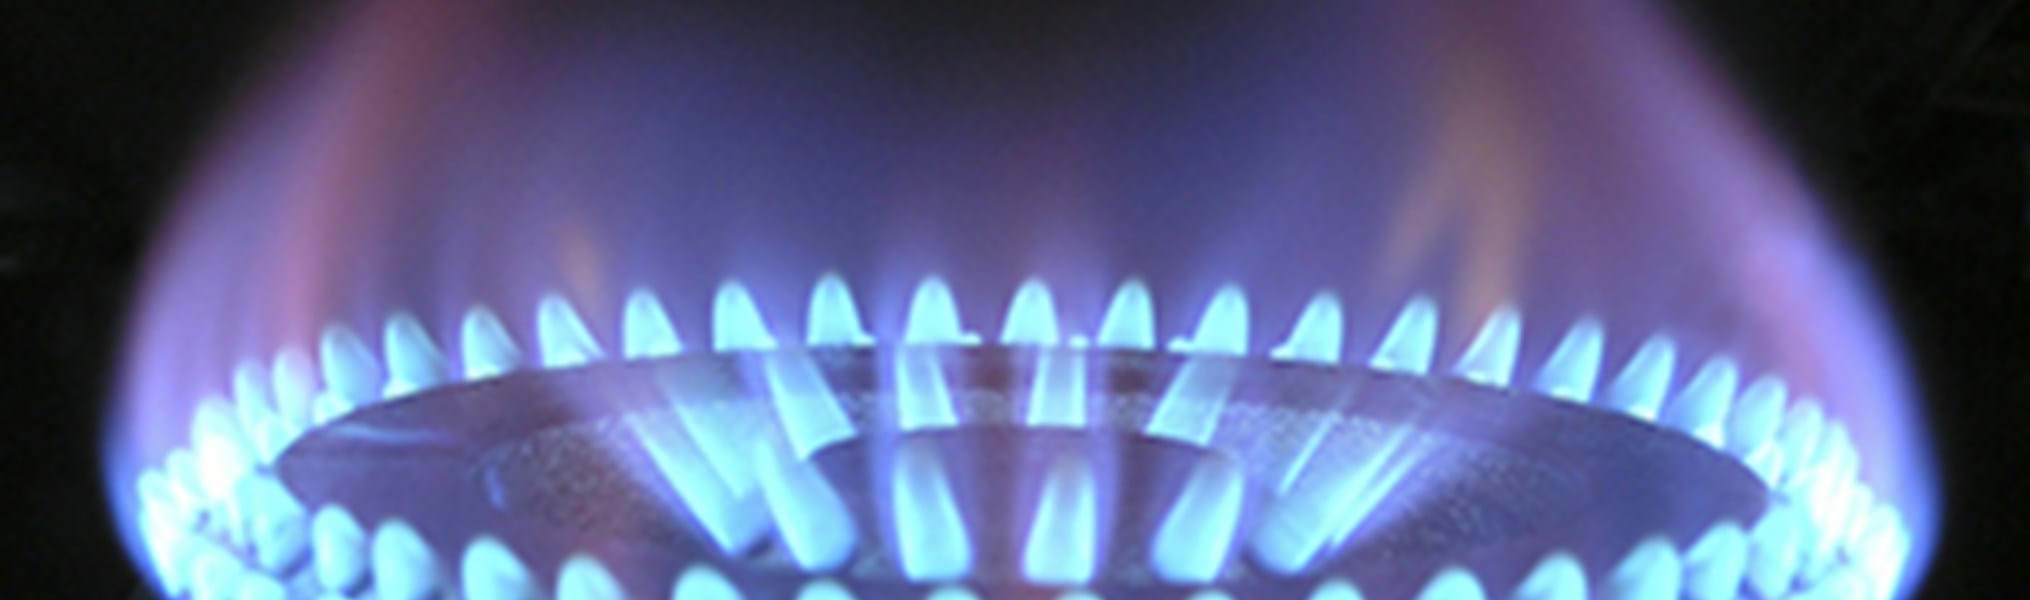 Gas flame competent person scheme